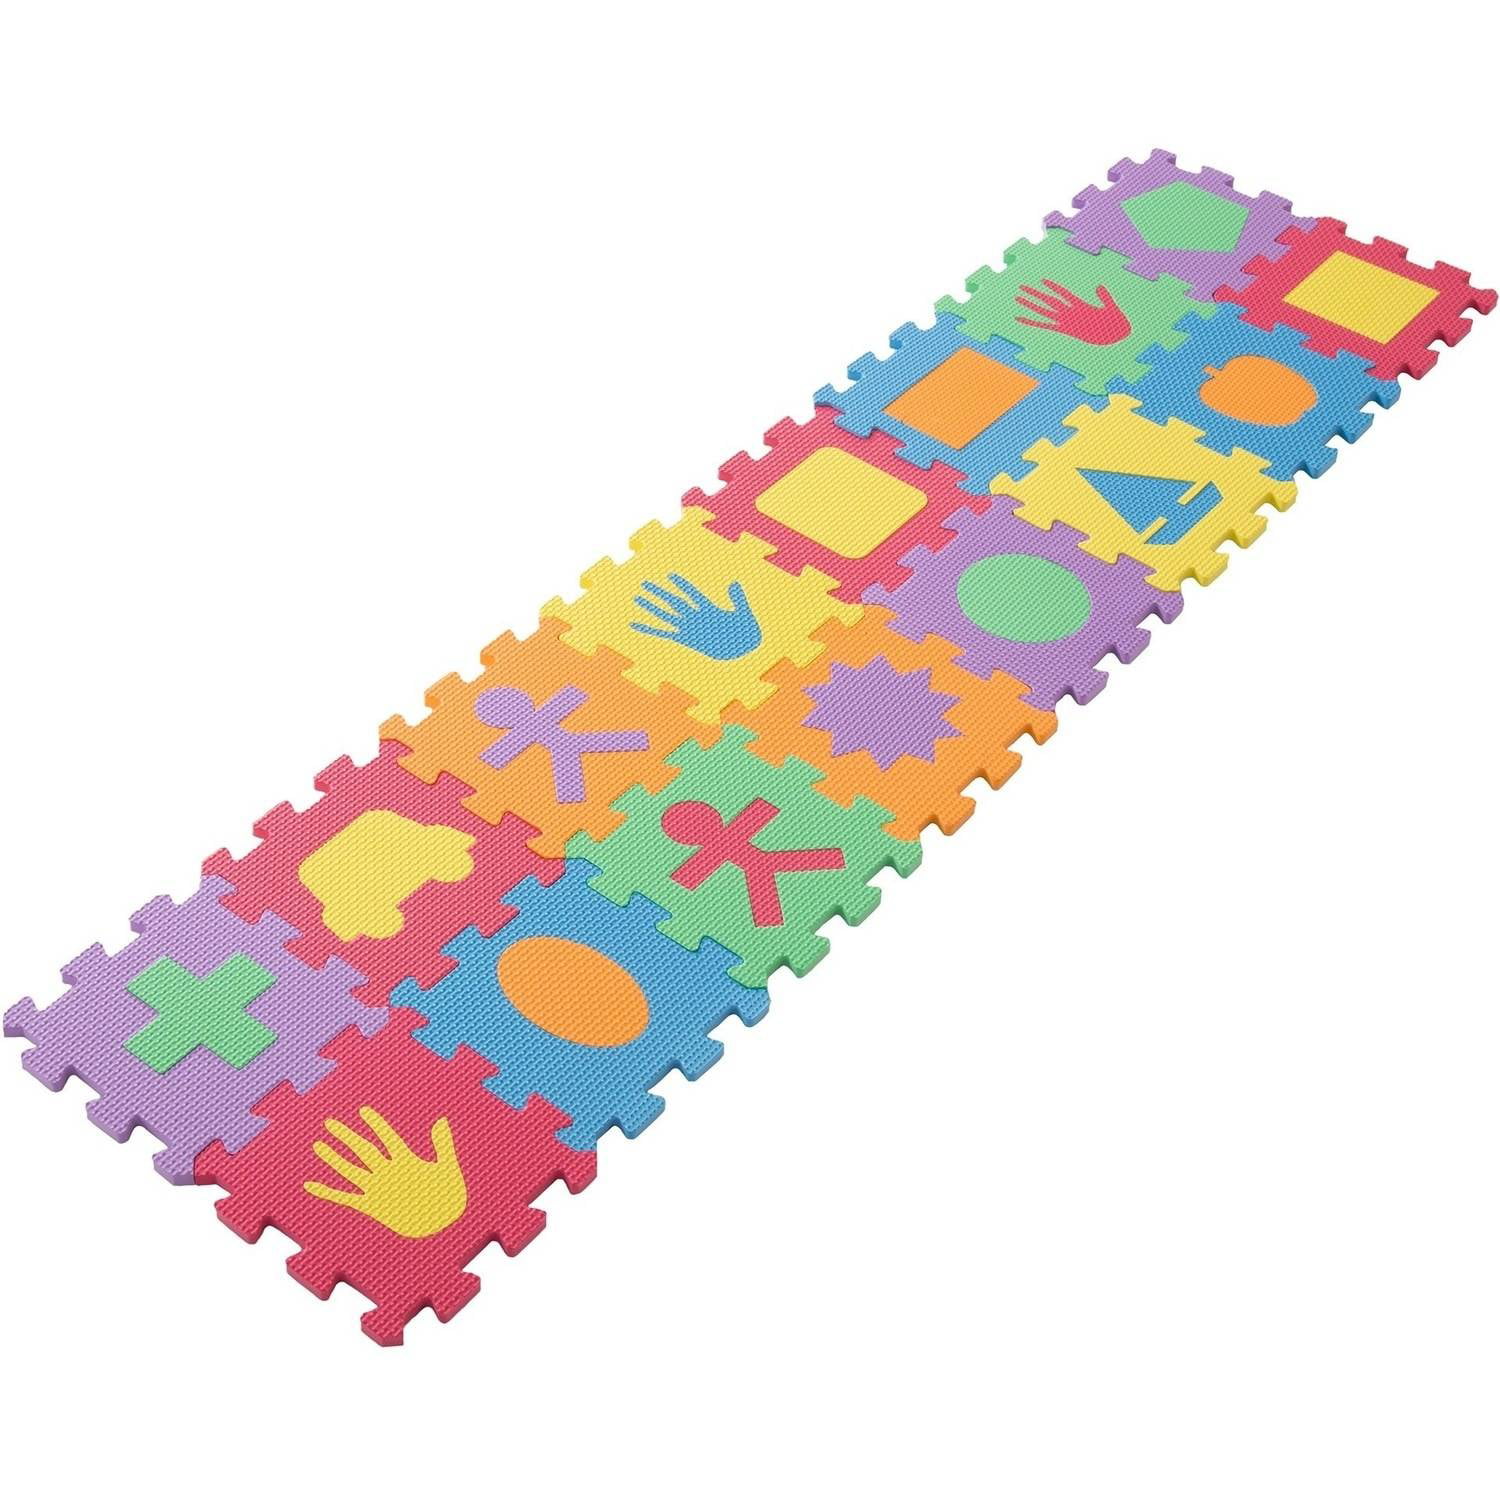 Nurseries Interlocking Foam Tile Play Mat with Shapes Nontoxic Childrens Multicolor Puzzle Tiles for Playrooms Gyms and More 